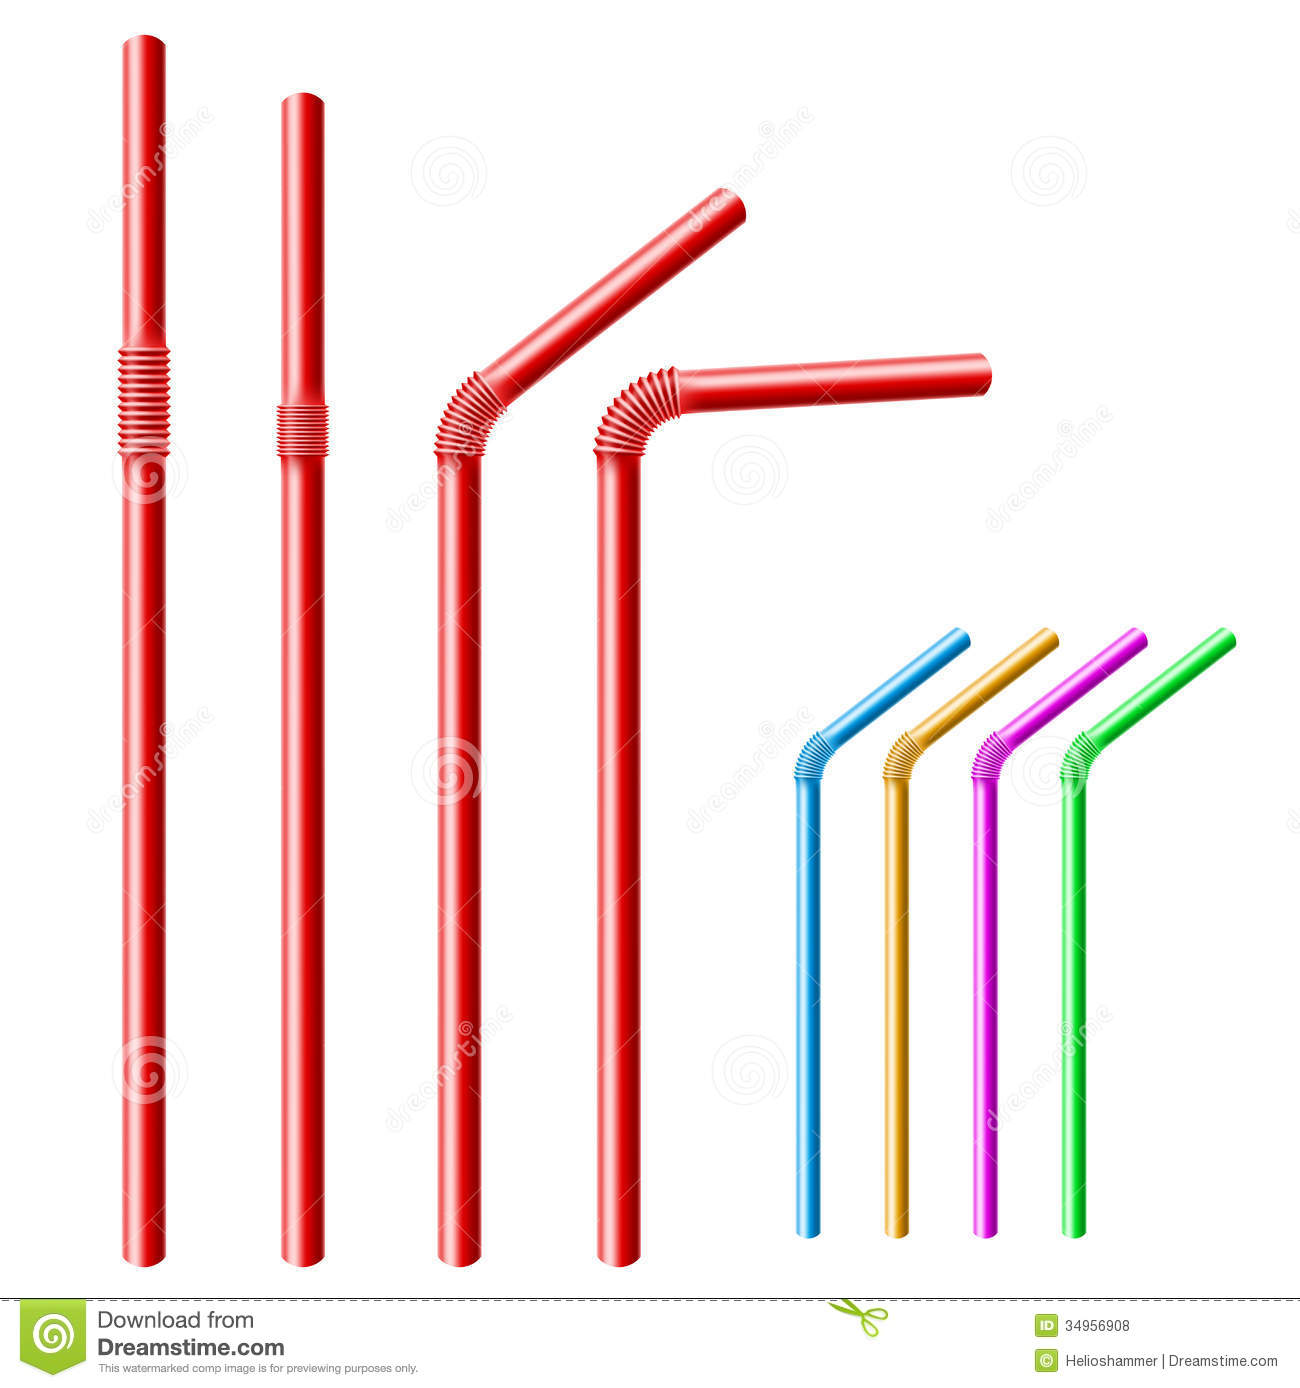 Straw Clipart Drinking Straw Set Different Colors Positions 34956908